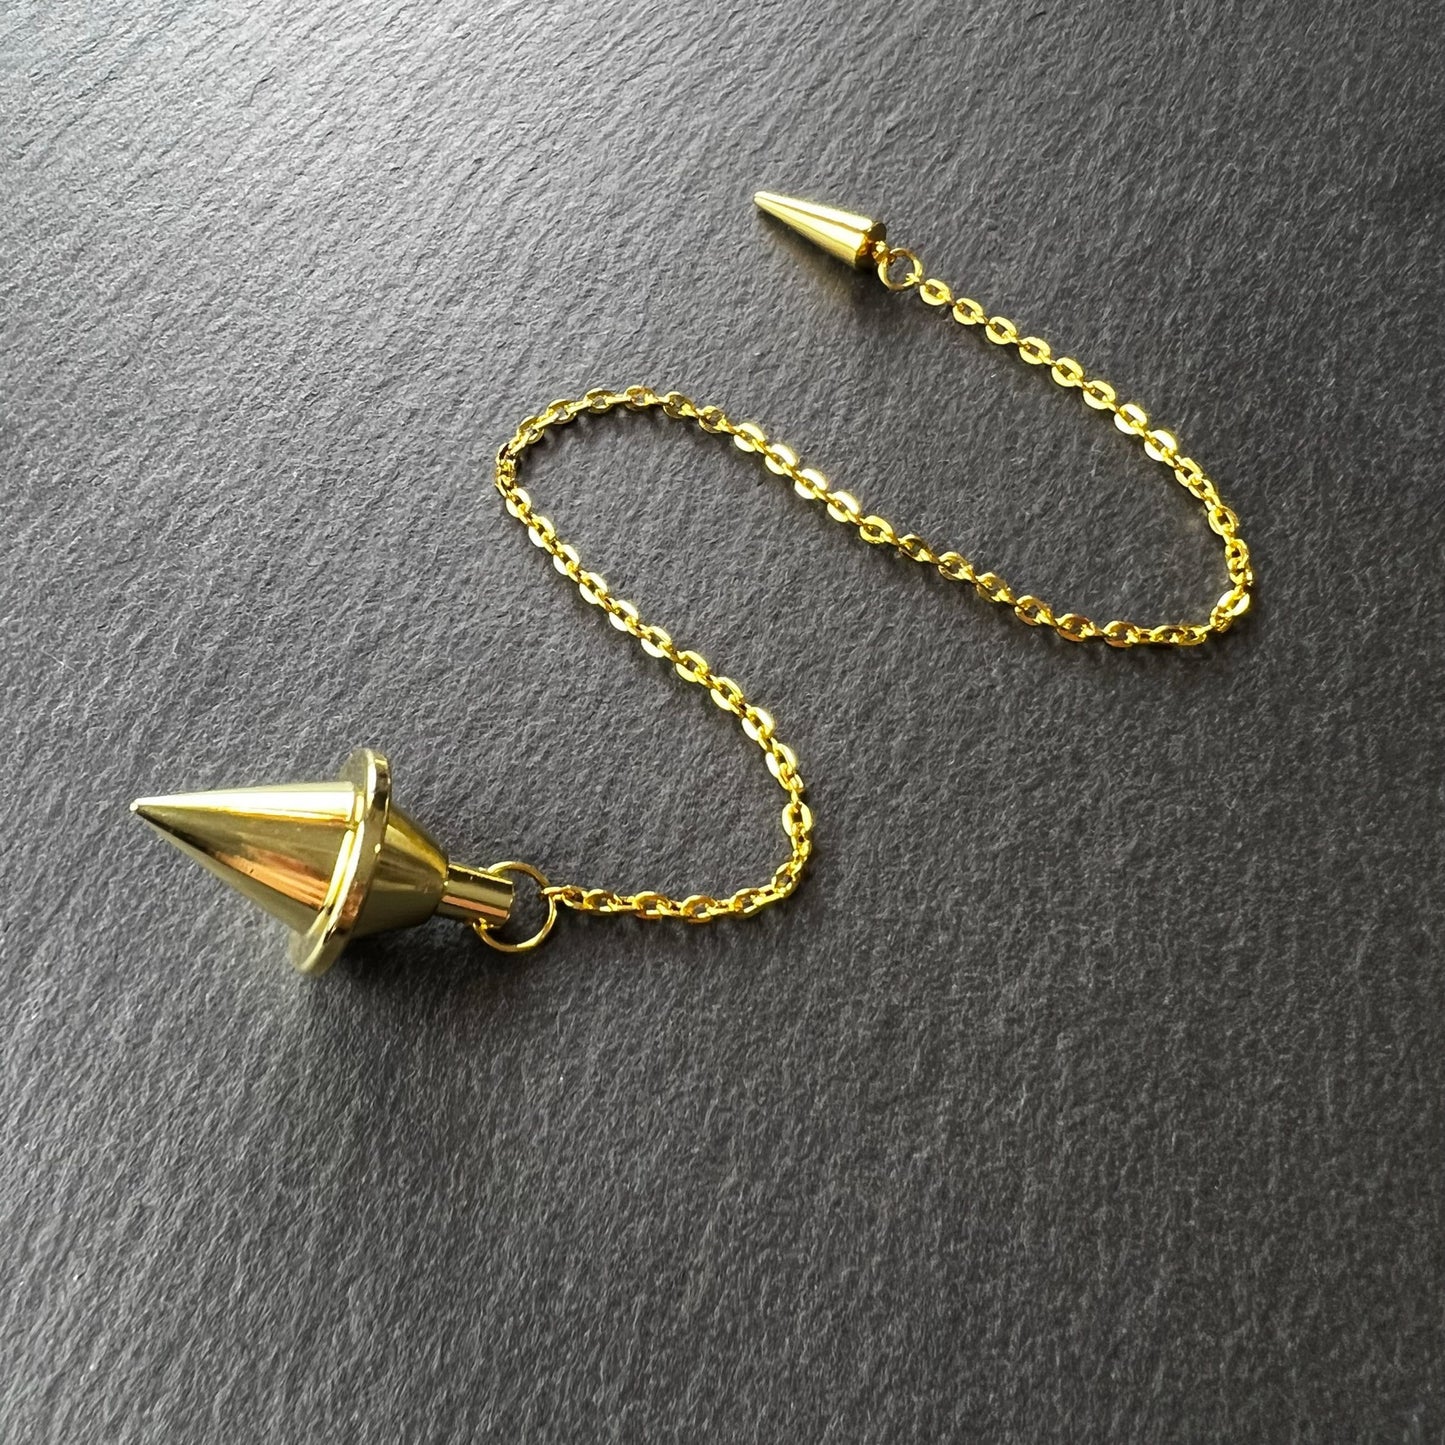 Golden double cone pendulum with a spike charm - The French Witch shop